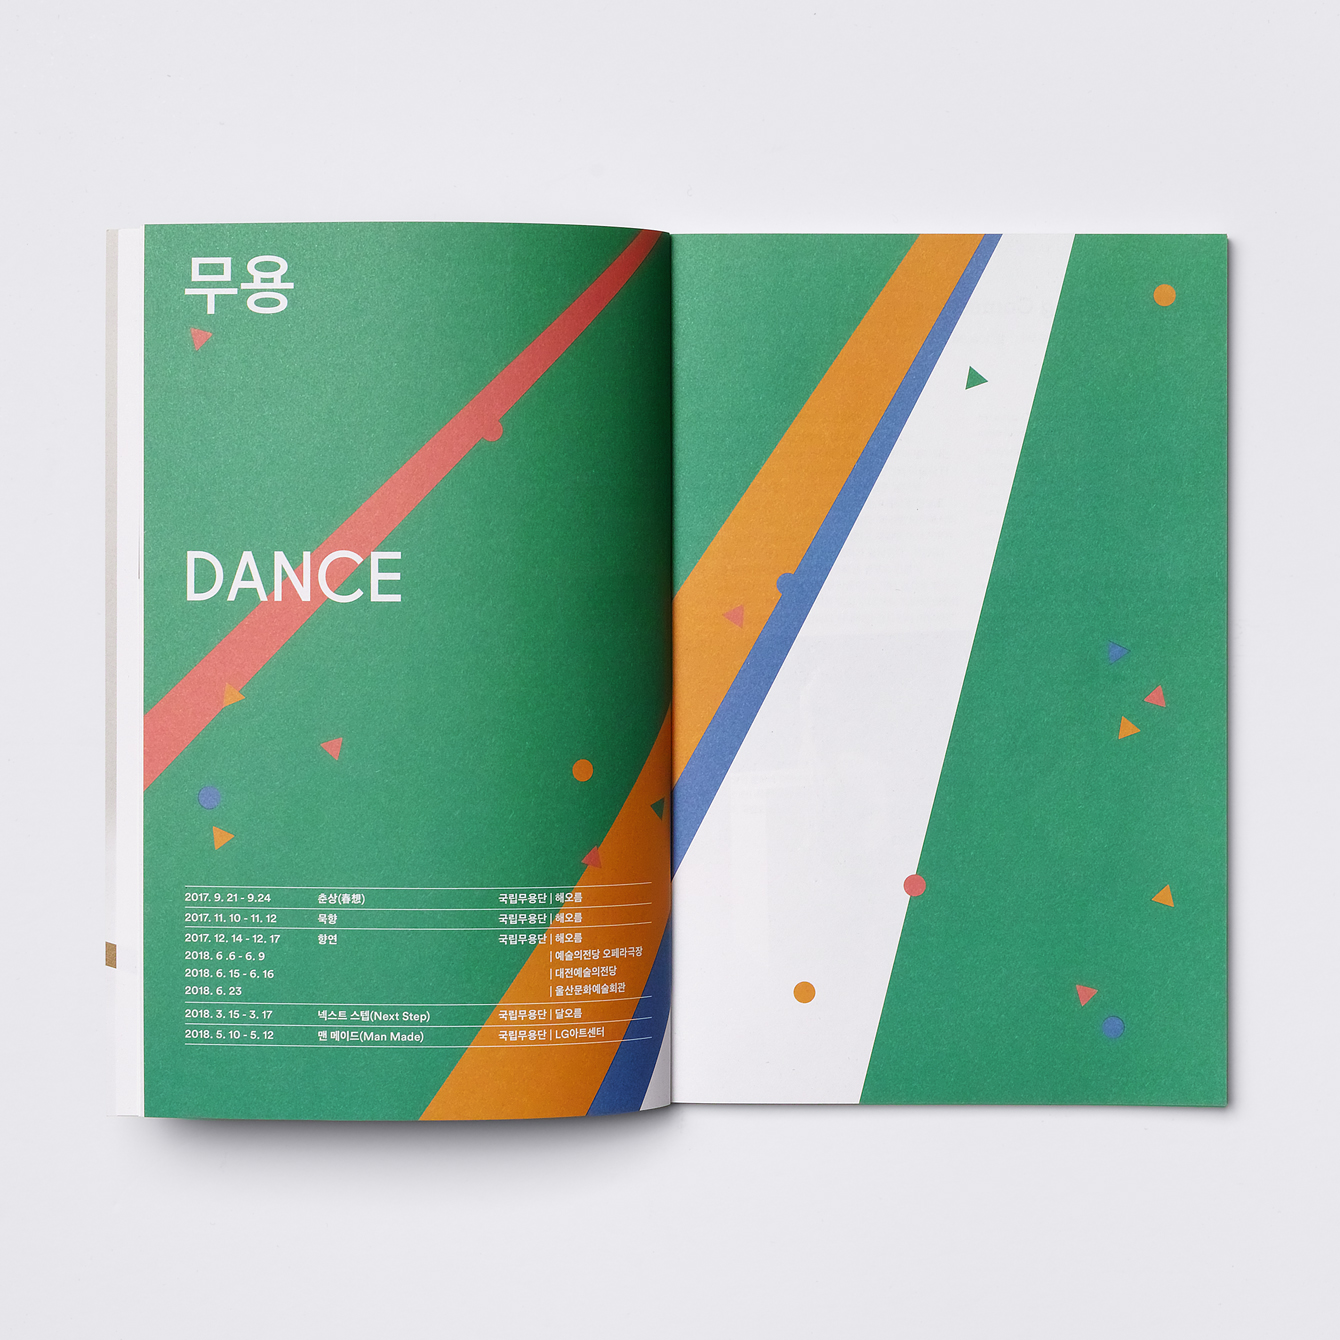 Program spread by Studio fnt for the 2017–18 season at the National Theatre of Korea